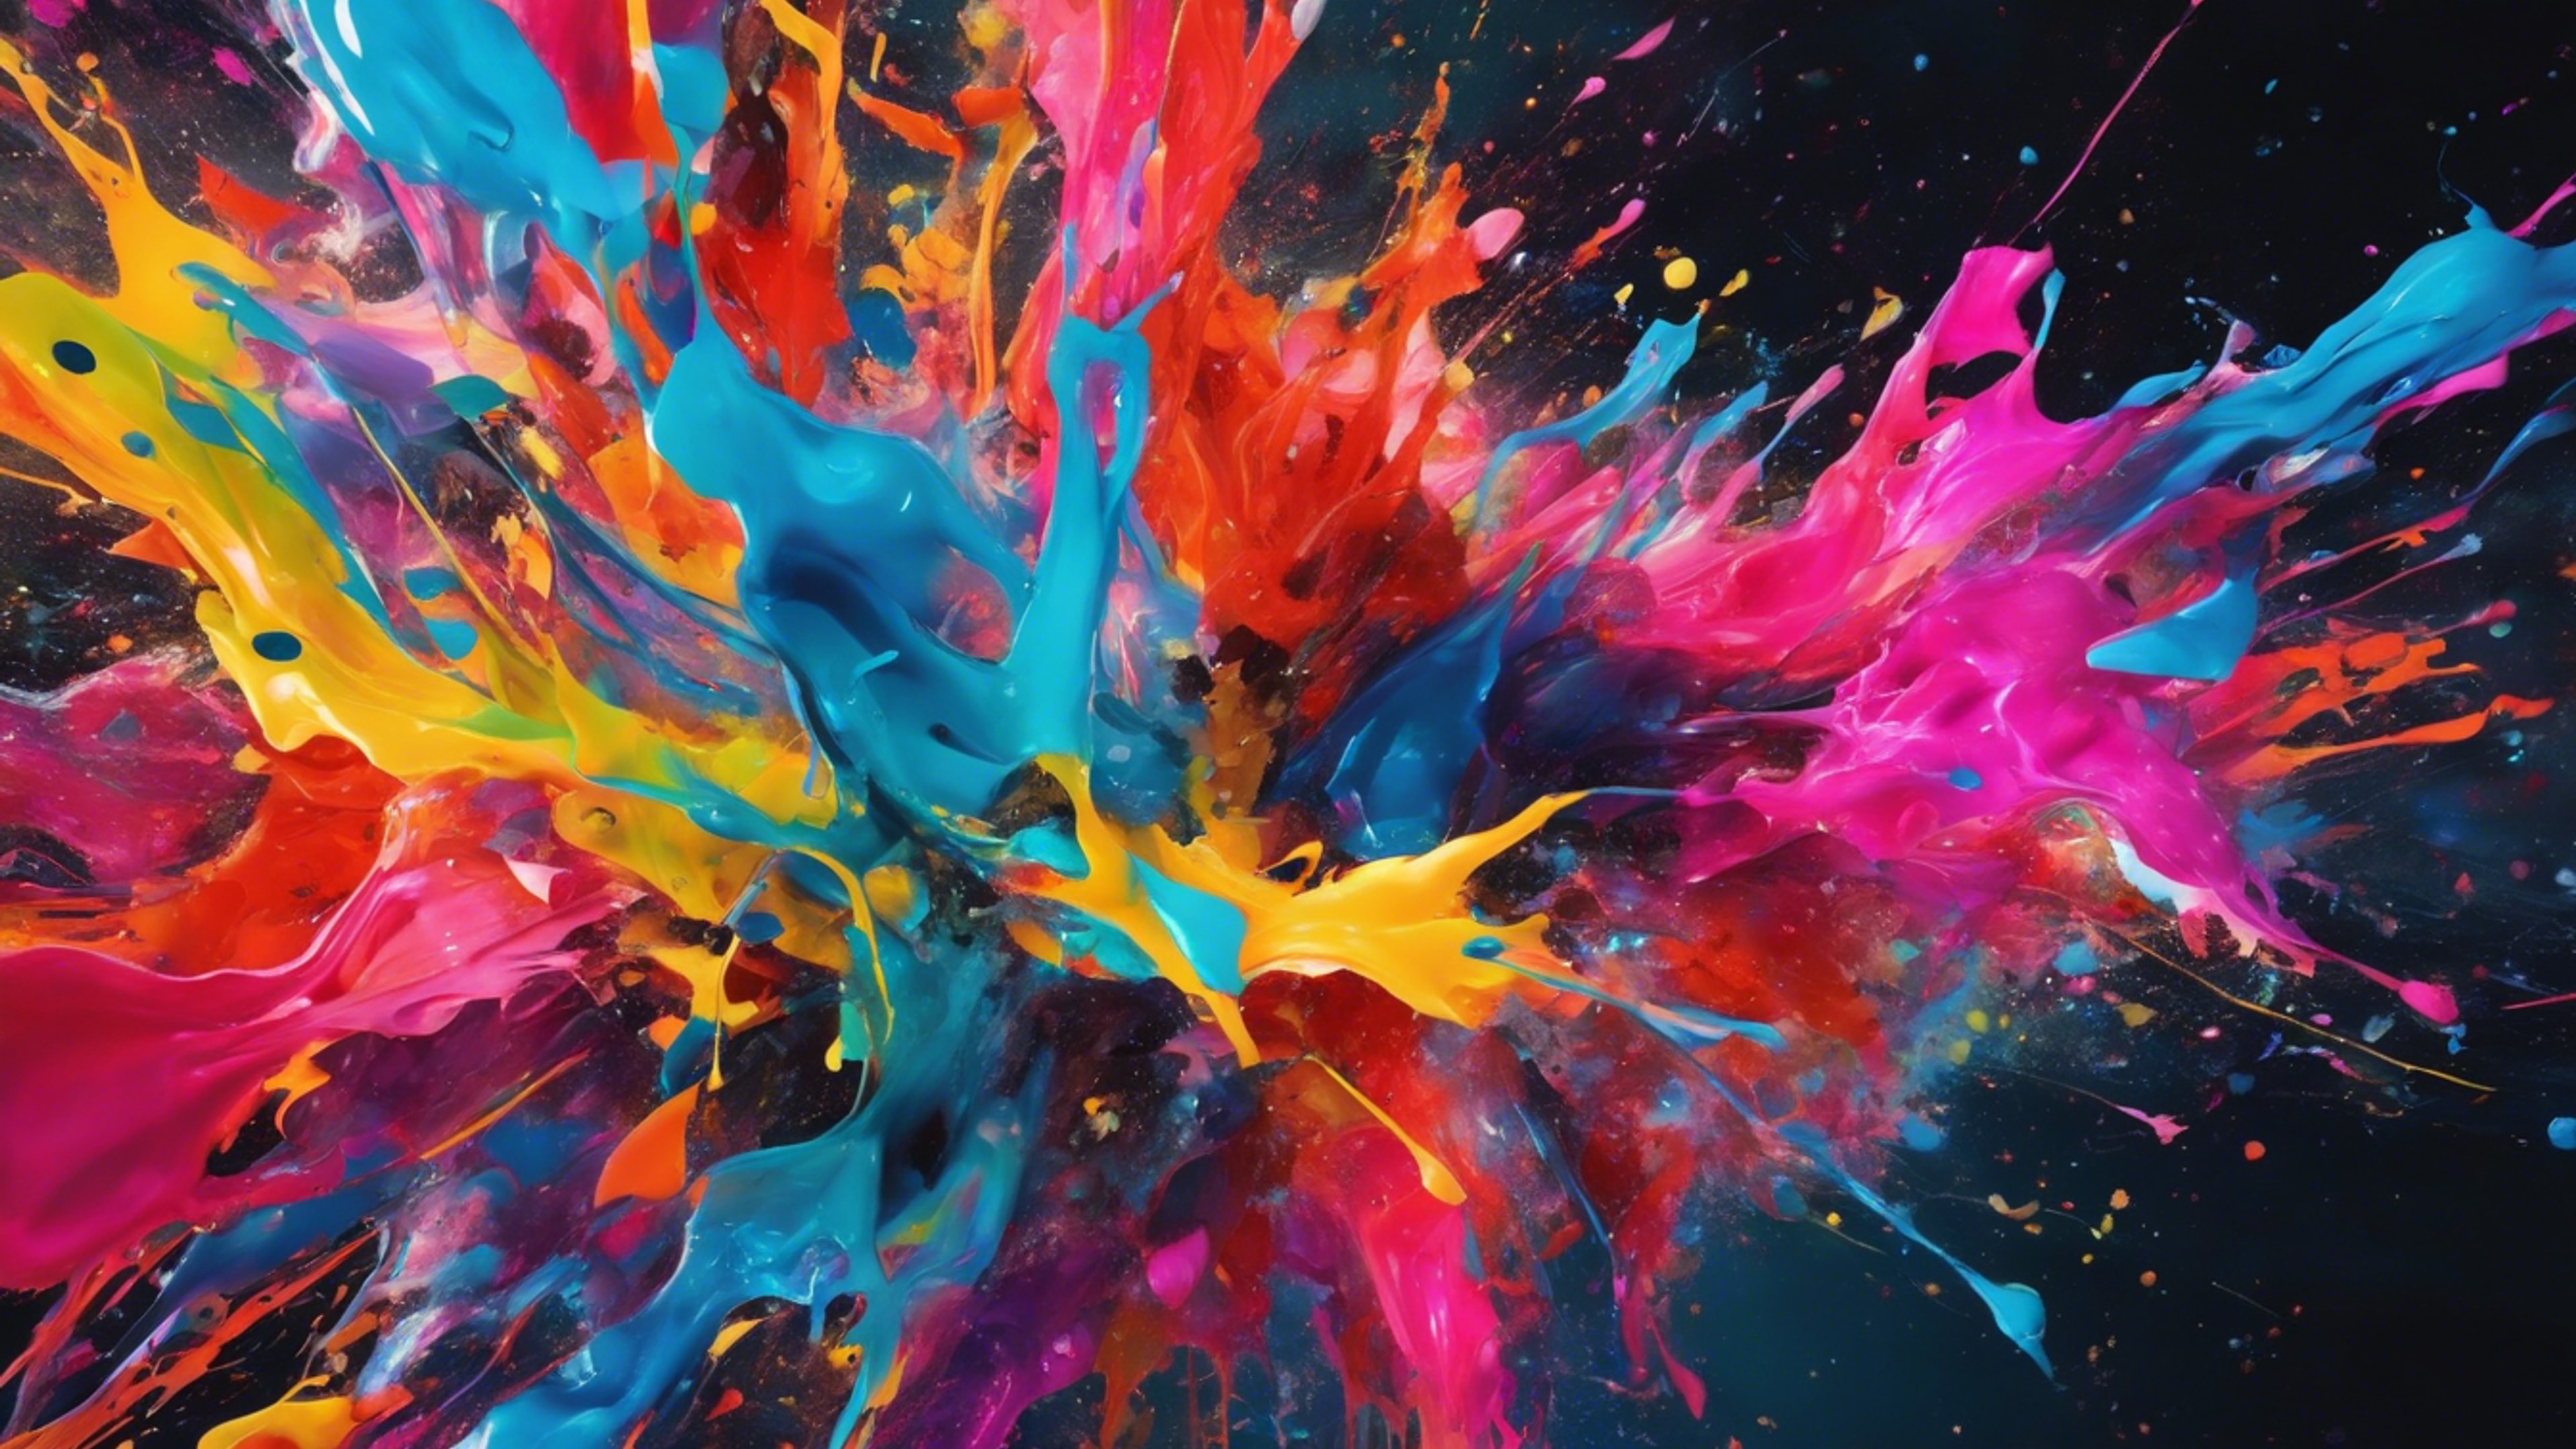 A modern abstract painting with bold splashes of neon colors evoking energetic movement. Wallpaper[c6f71c0d68d34cc6b6df]